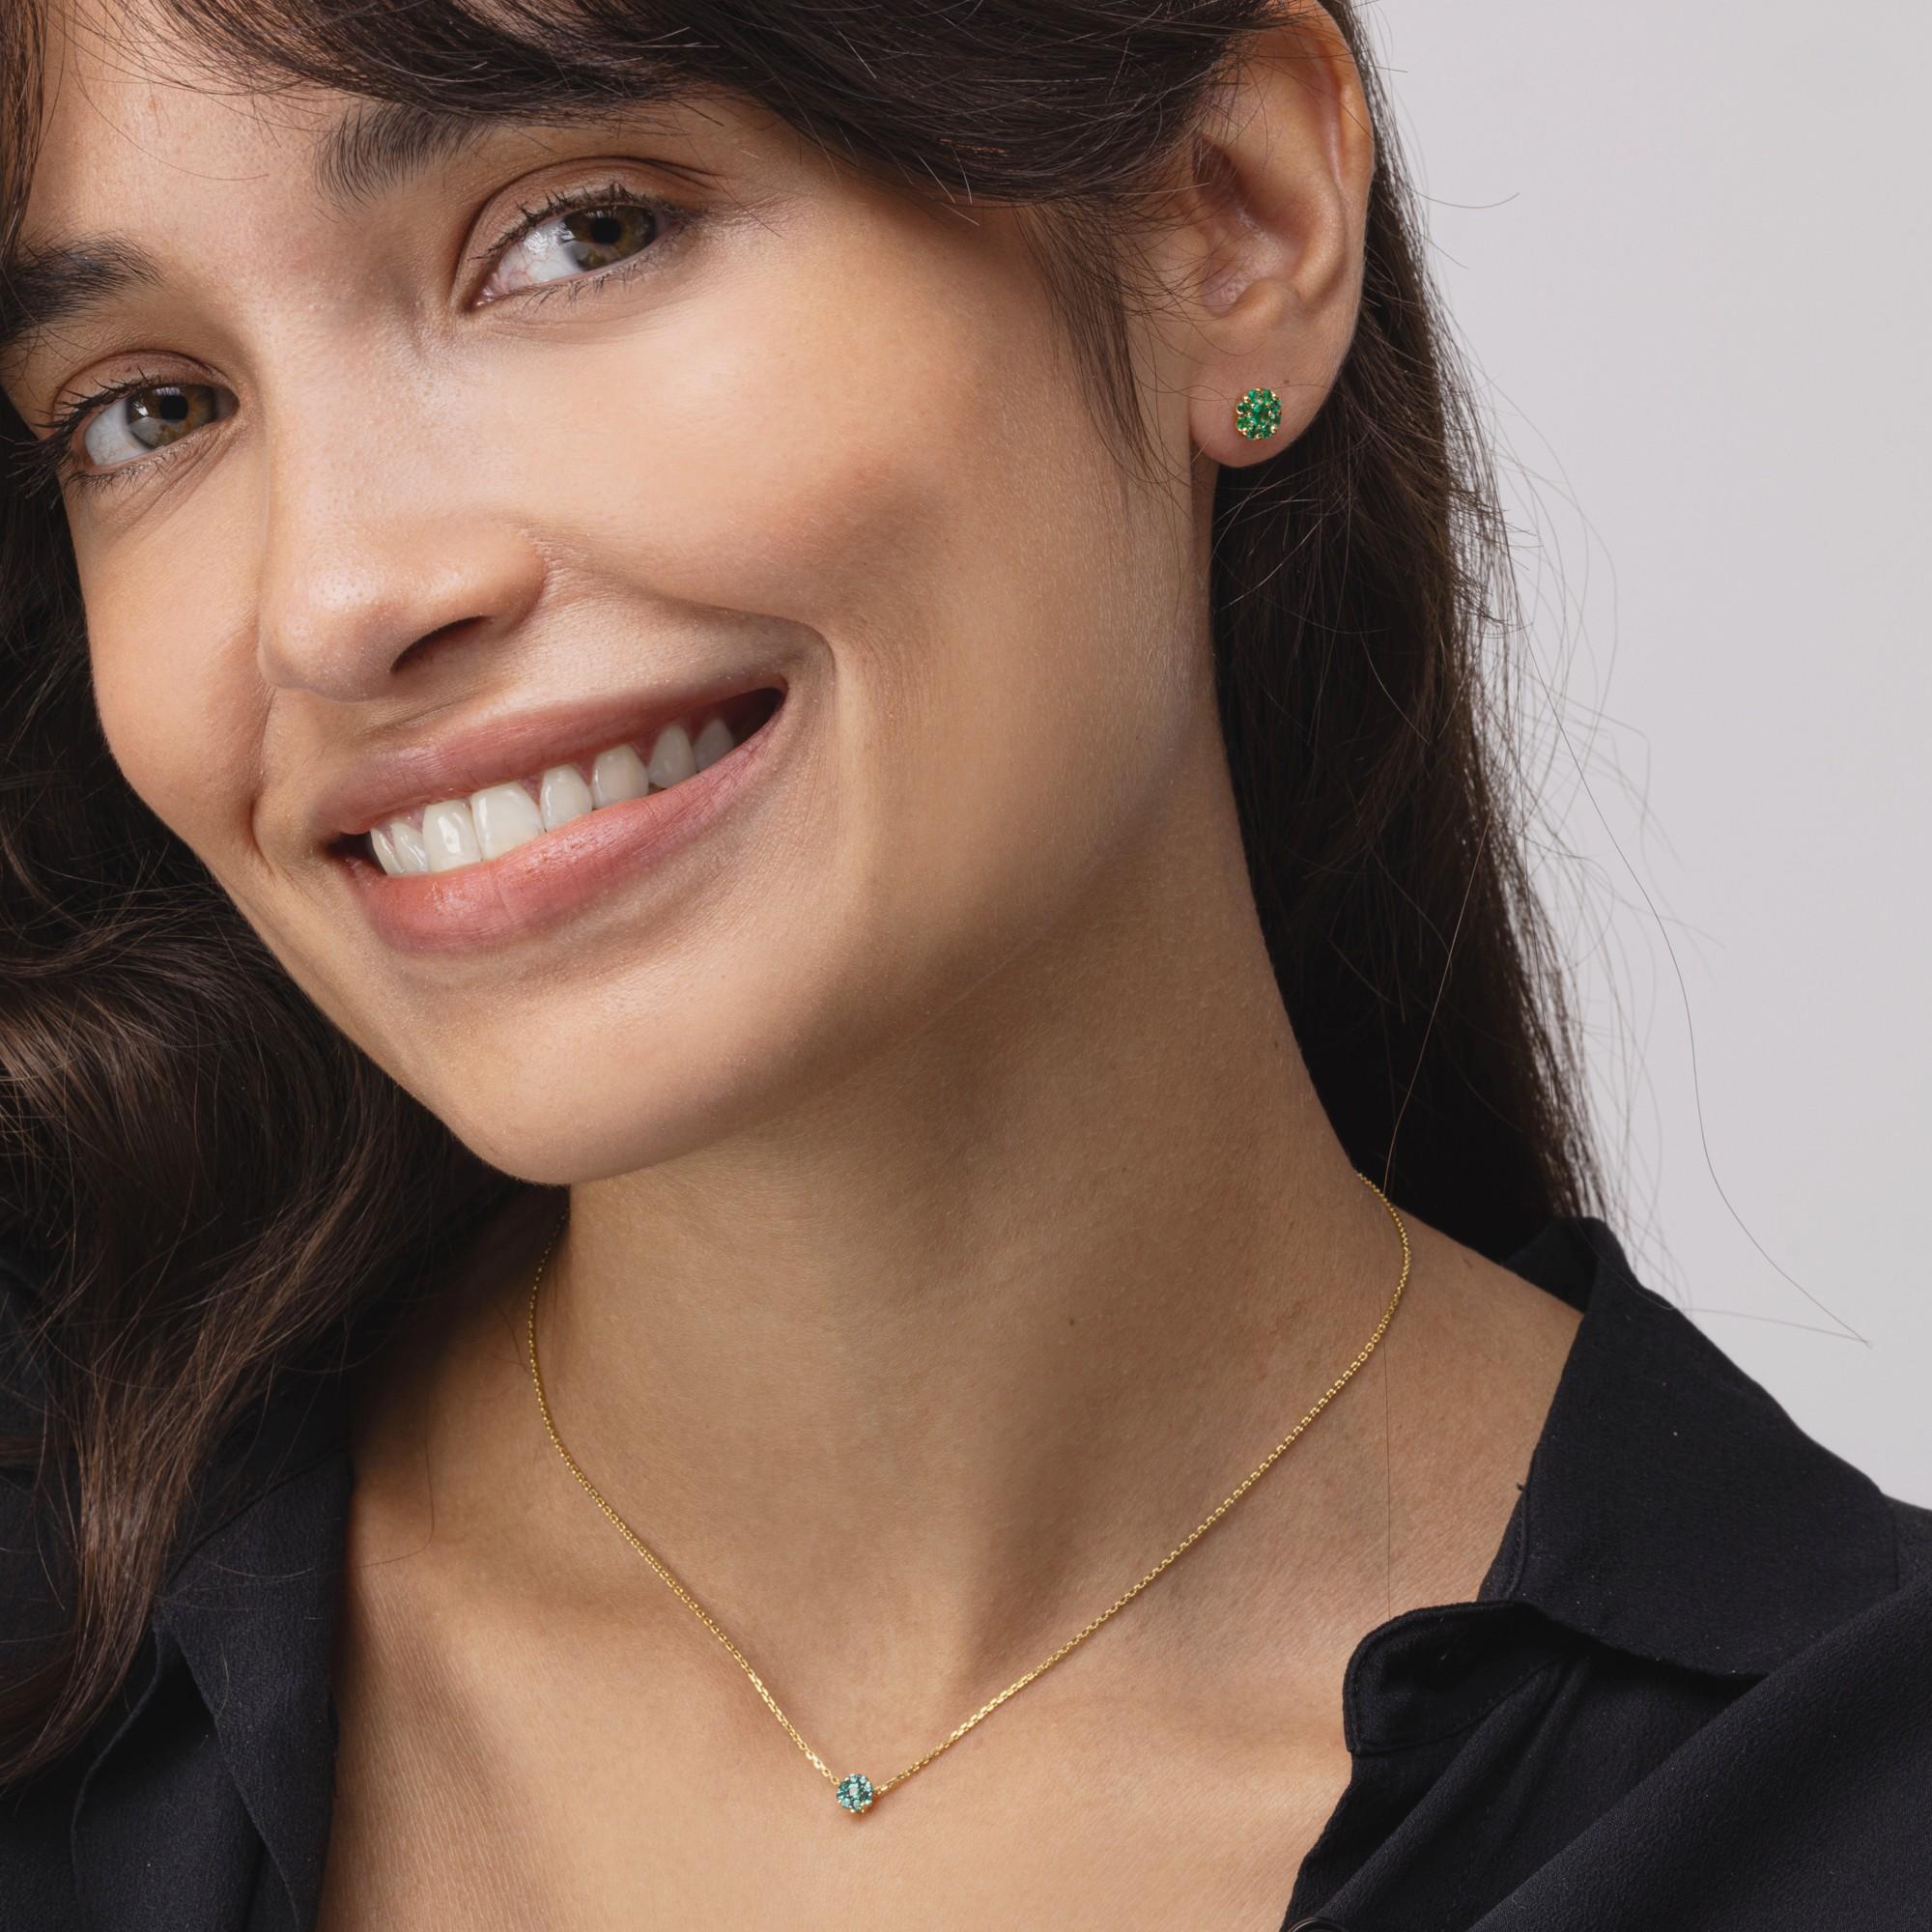 Alex Jona design collection, hand crafted in Italy, 18 Karat yellow gold chain necklace suspending a round pendant  set with 0.13 carats of round cut emeralds.

Alex Jona jewels stand out, not only for their special design and for the excellent